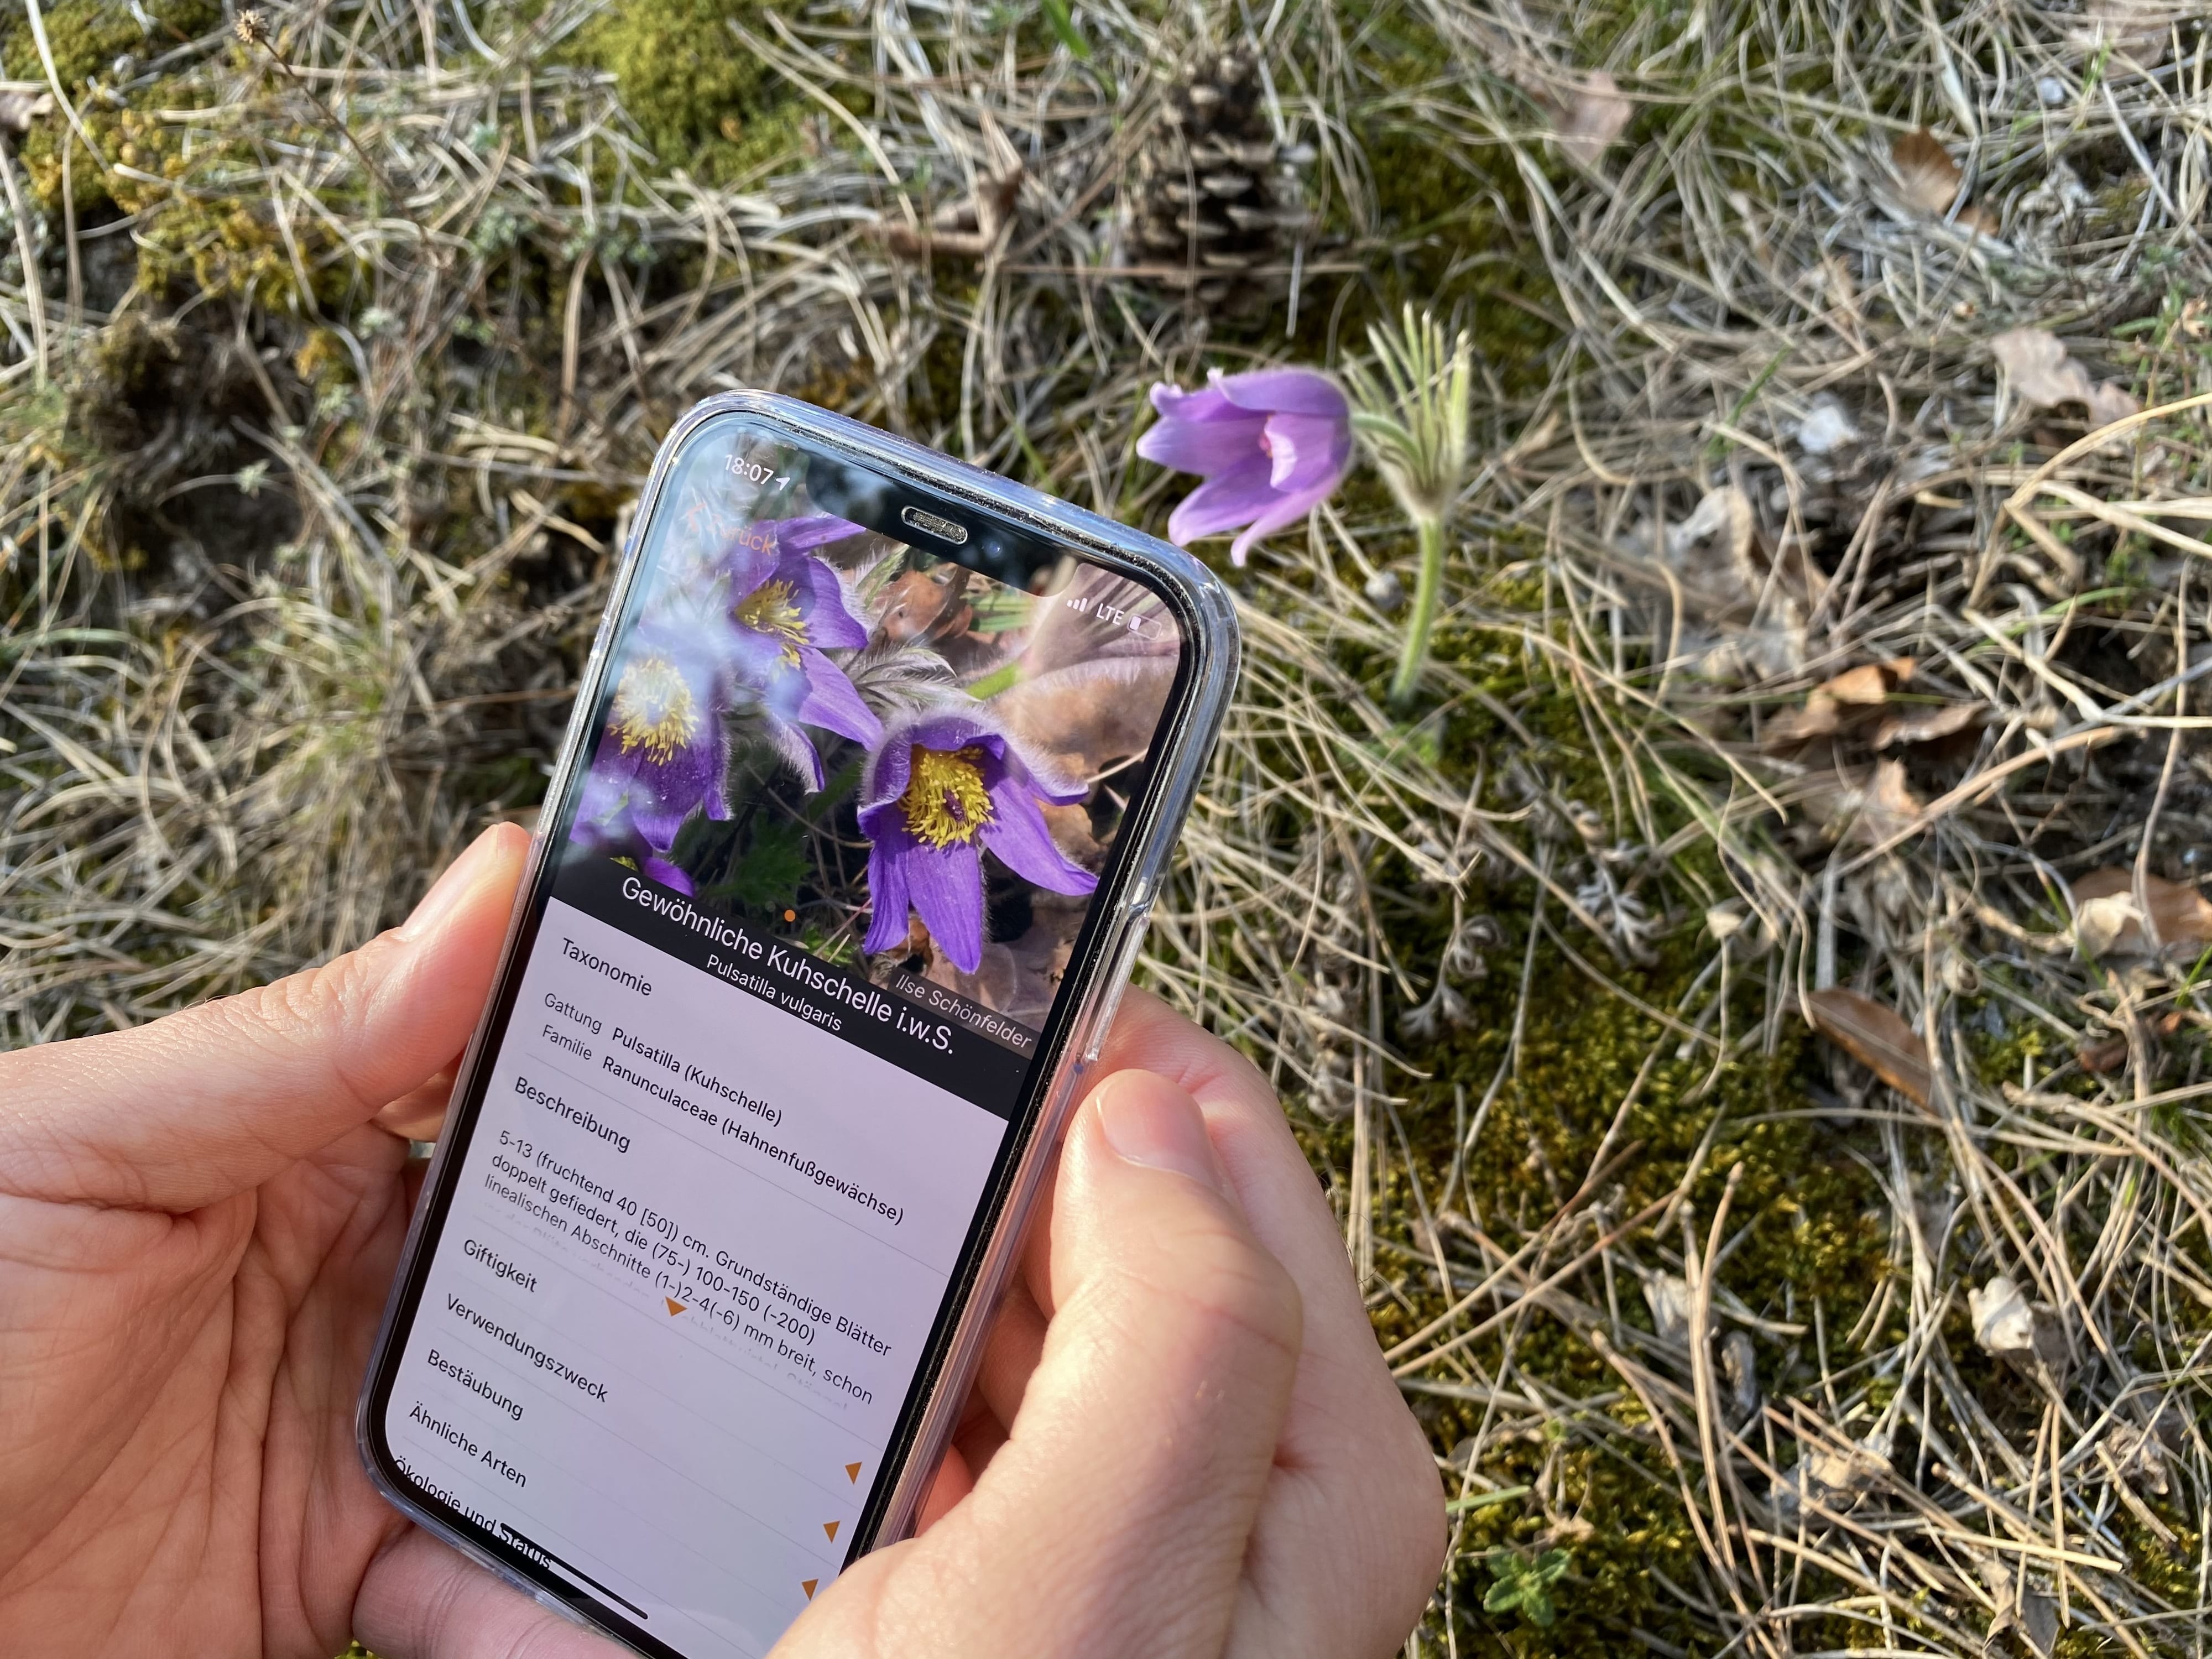 New smartphone perspectives for rapid detection of biodiversity changes